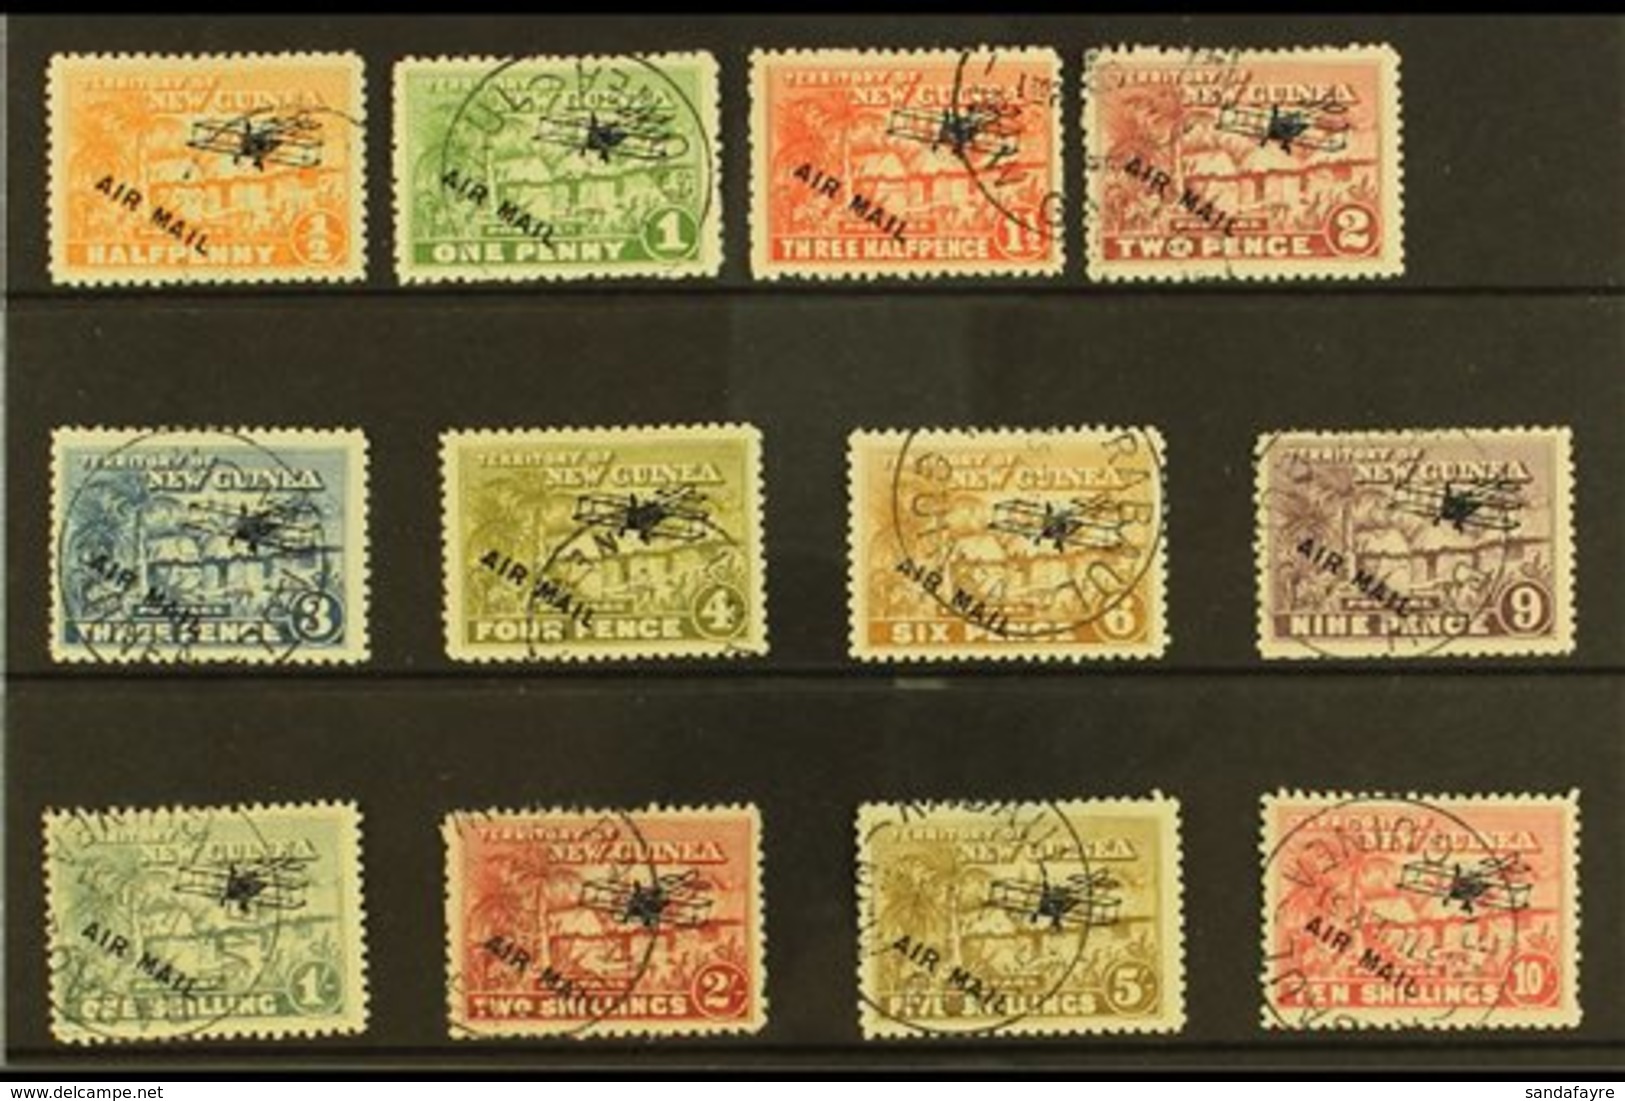 1931 Air Overprinted "Native Village" Set To 10s, SG 137/48, Fine Cds Used, 2s Value With Hinge Thin (12 Stamps) For Mor - Papouasie-Nouvelle-Guinée